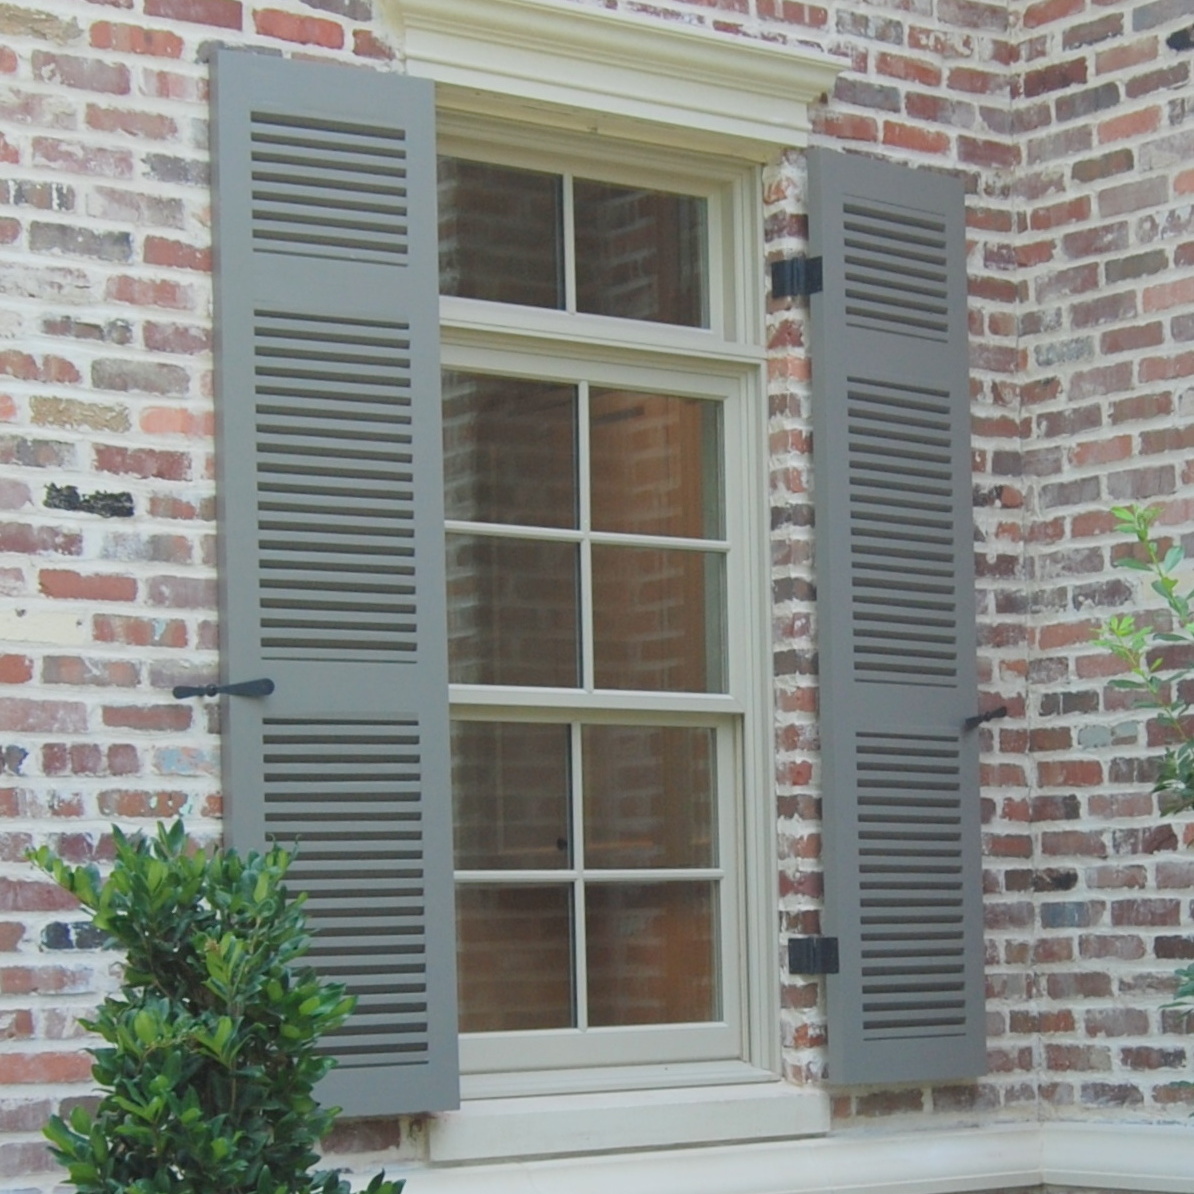 Exterior window of a brick Claremont home